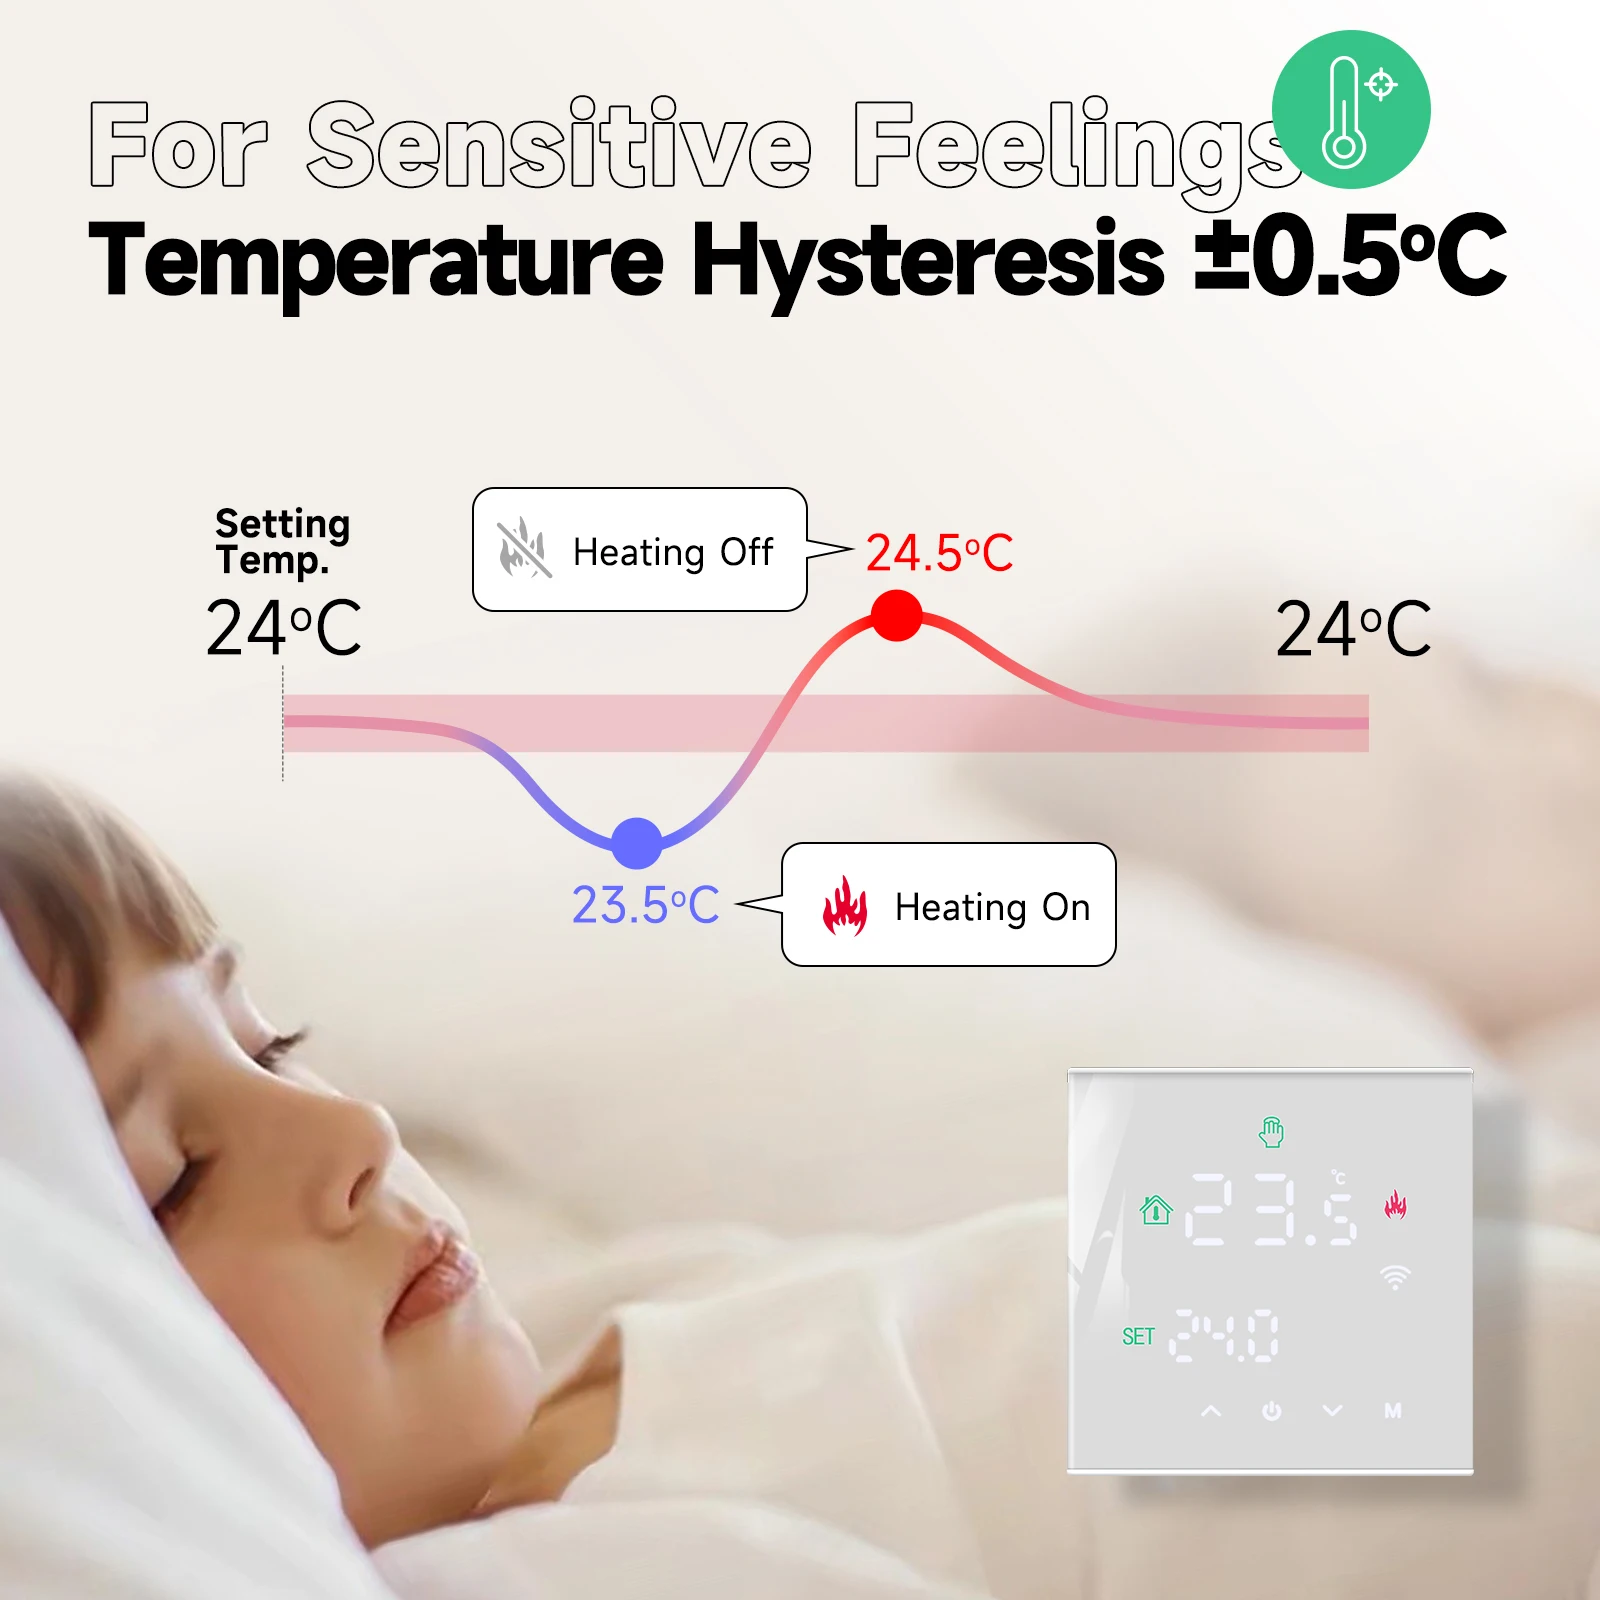 X5H Tuya Electric Floor Heating Room Thermostat Water Gas Boiler Smart WiFi  / Z?gbee Indoor Thermoregulator Works With Google Smart Life 